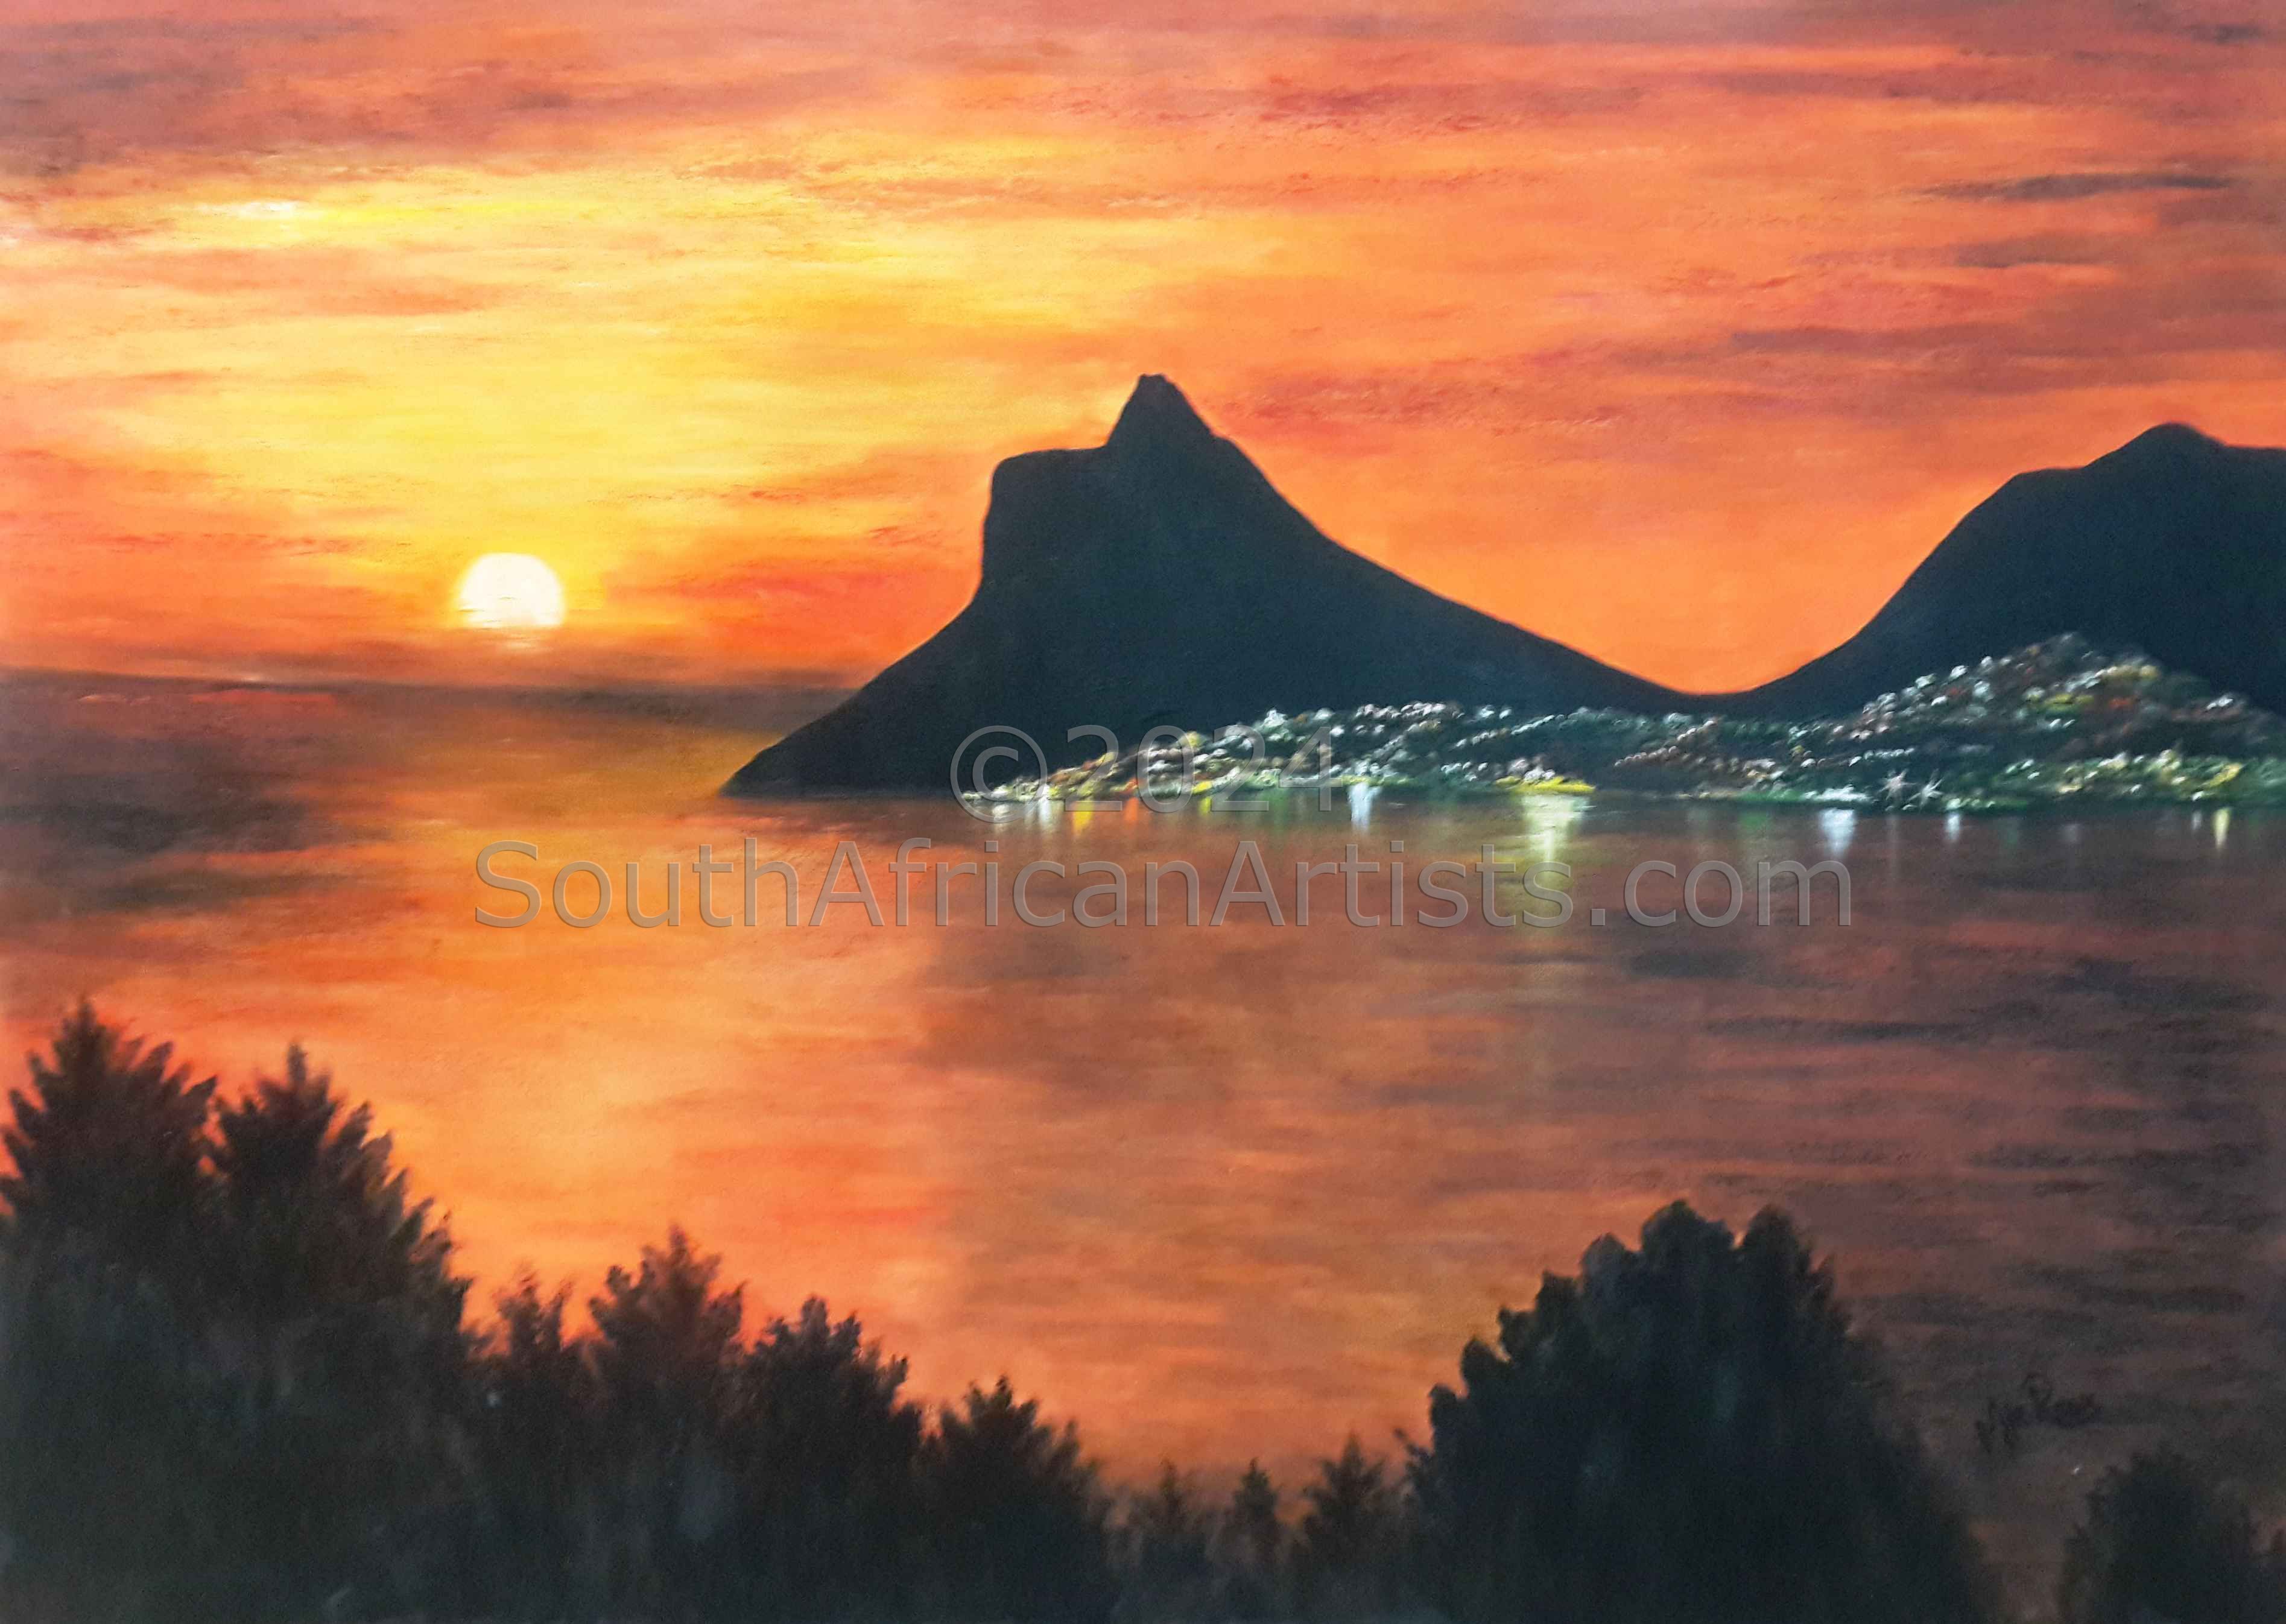 Sunset at Hout Bay ORDERED